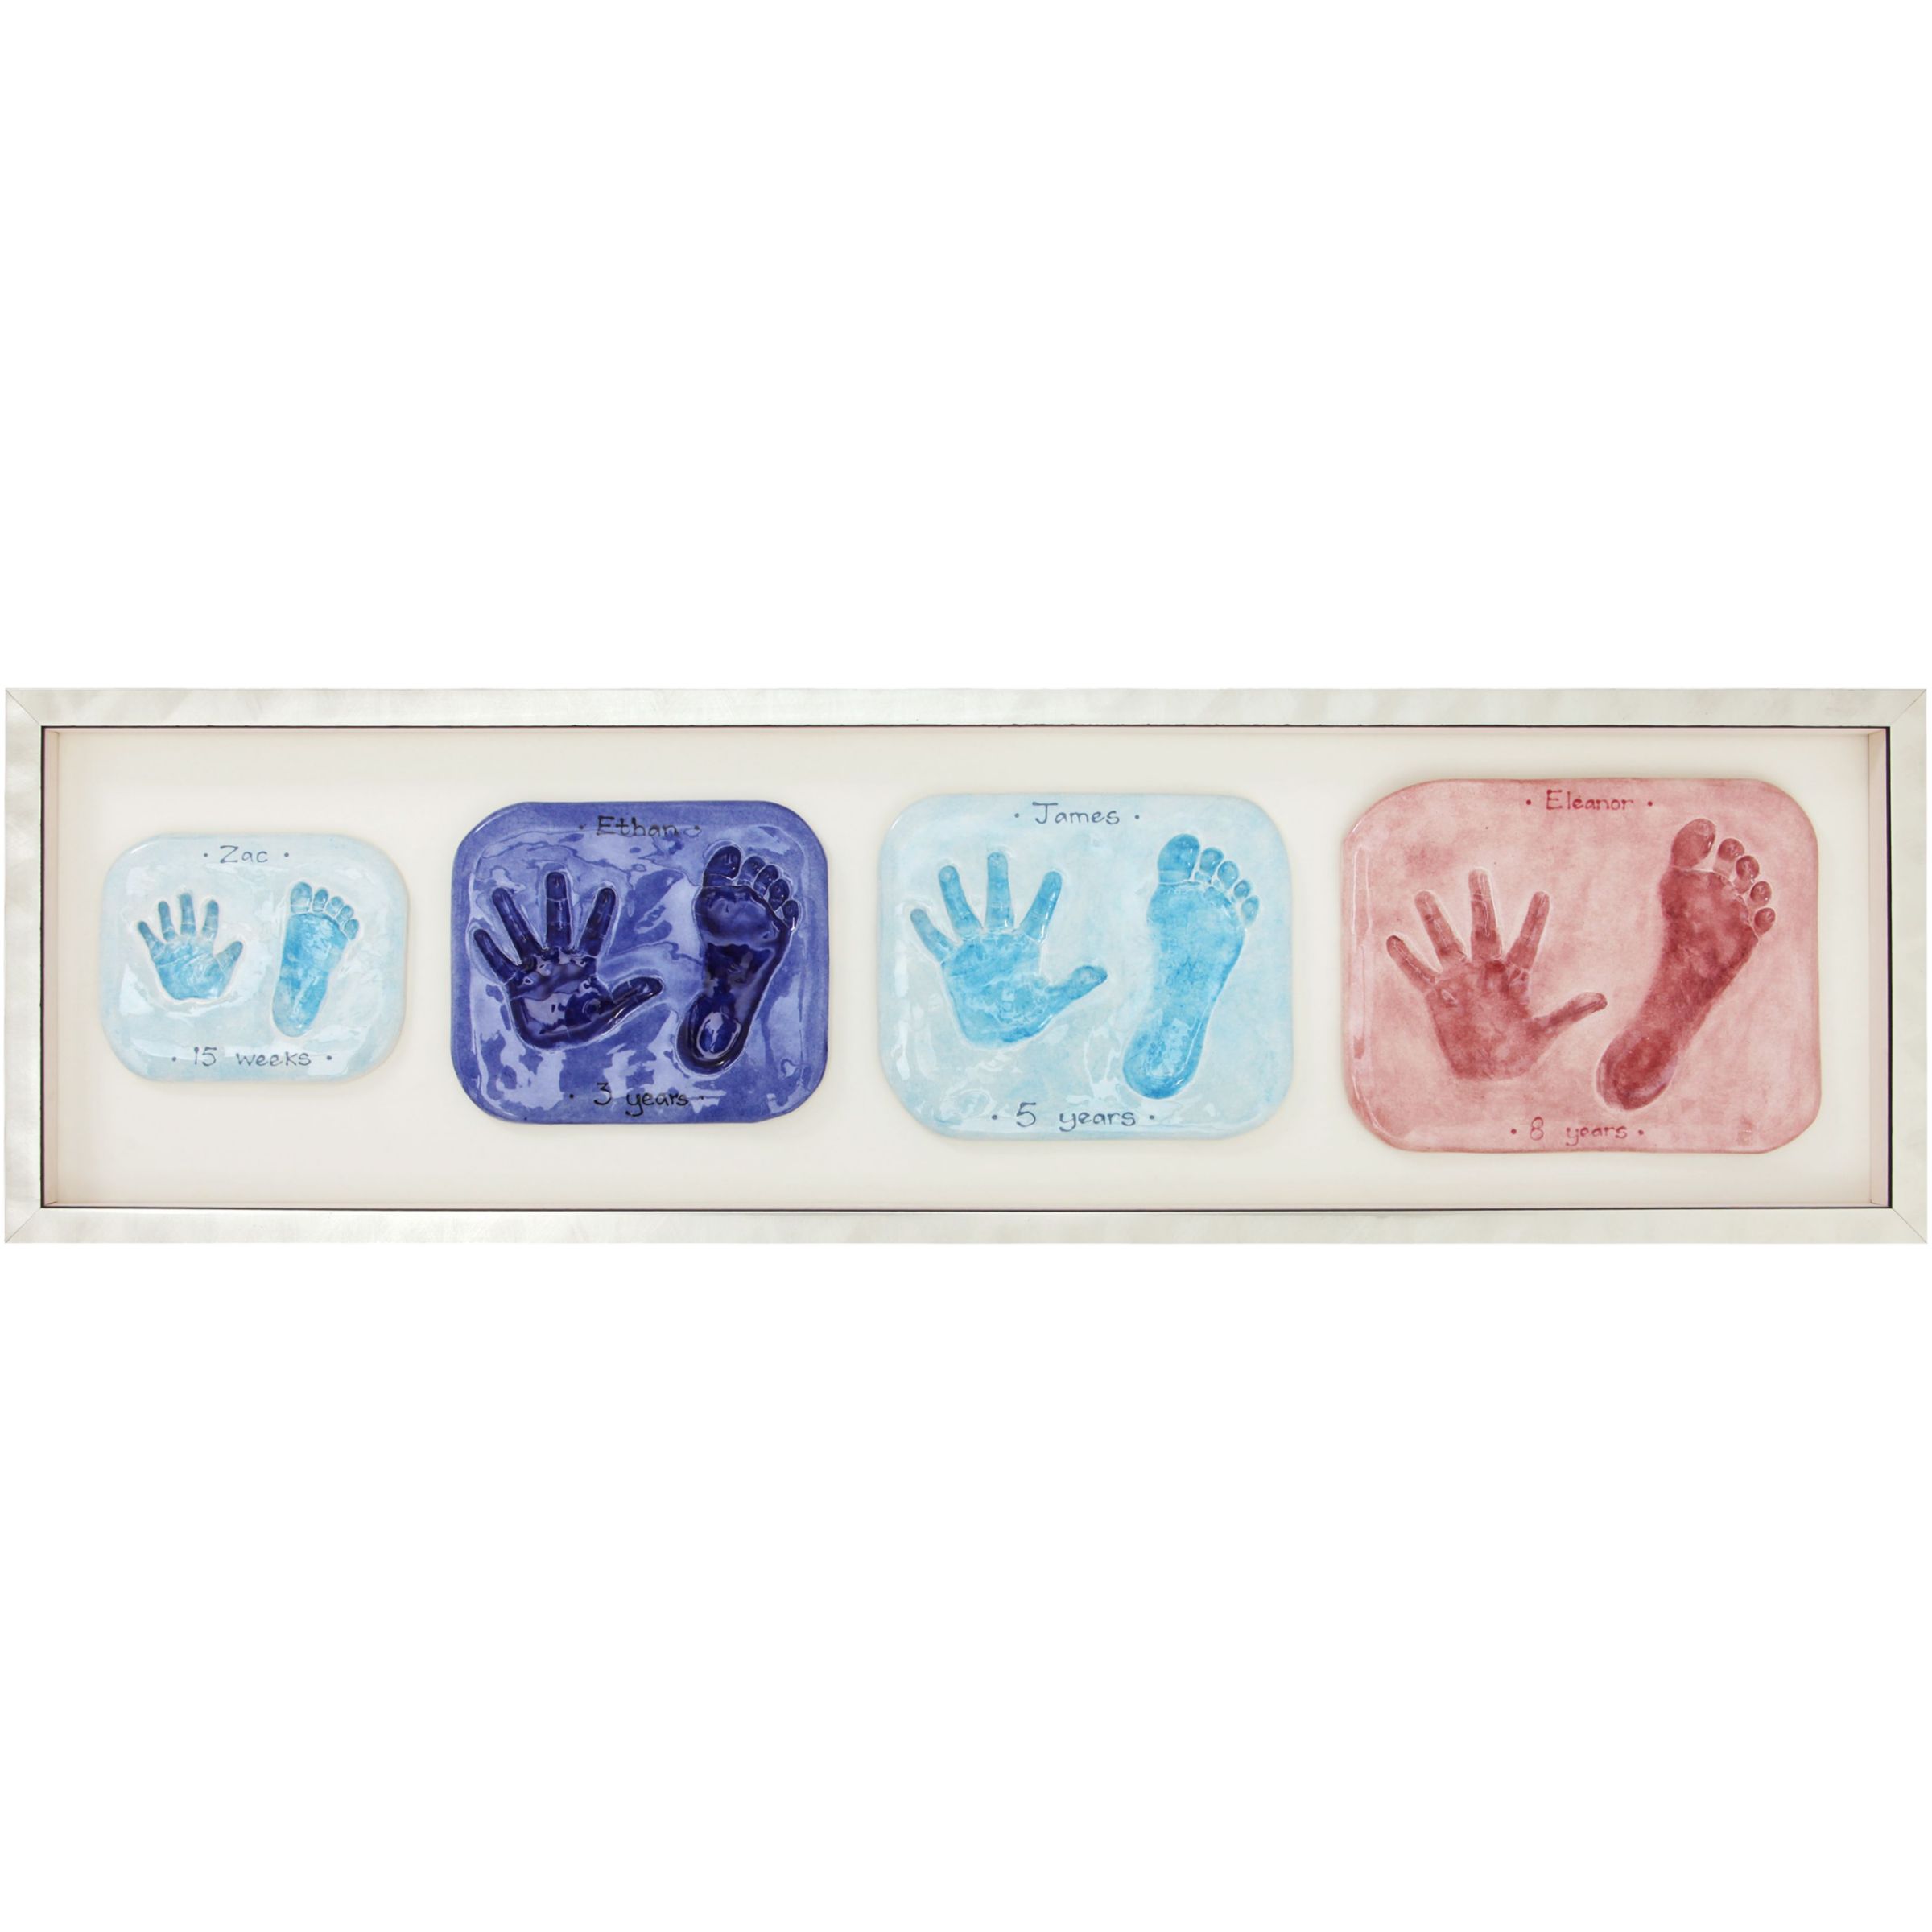 Buy Imprints Gift Certificate, 4 Double Family Prints, Silver Frame 